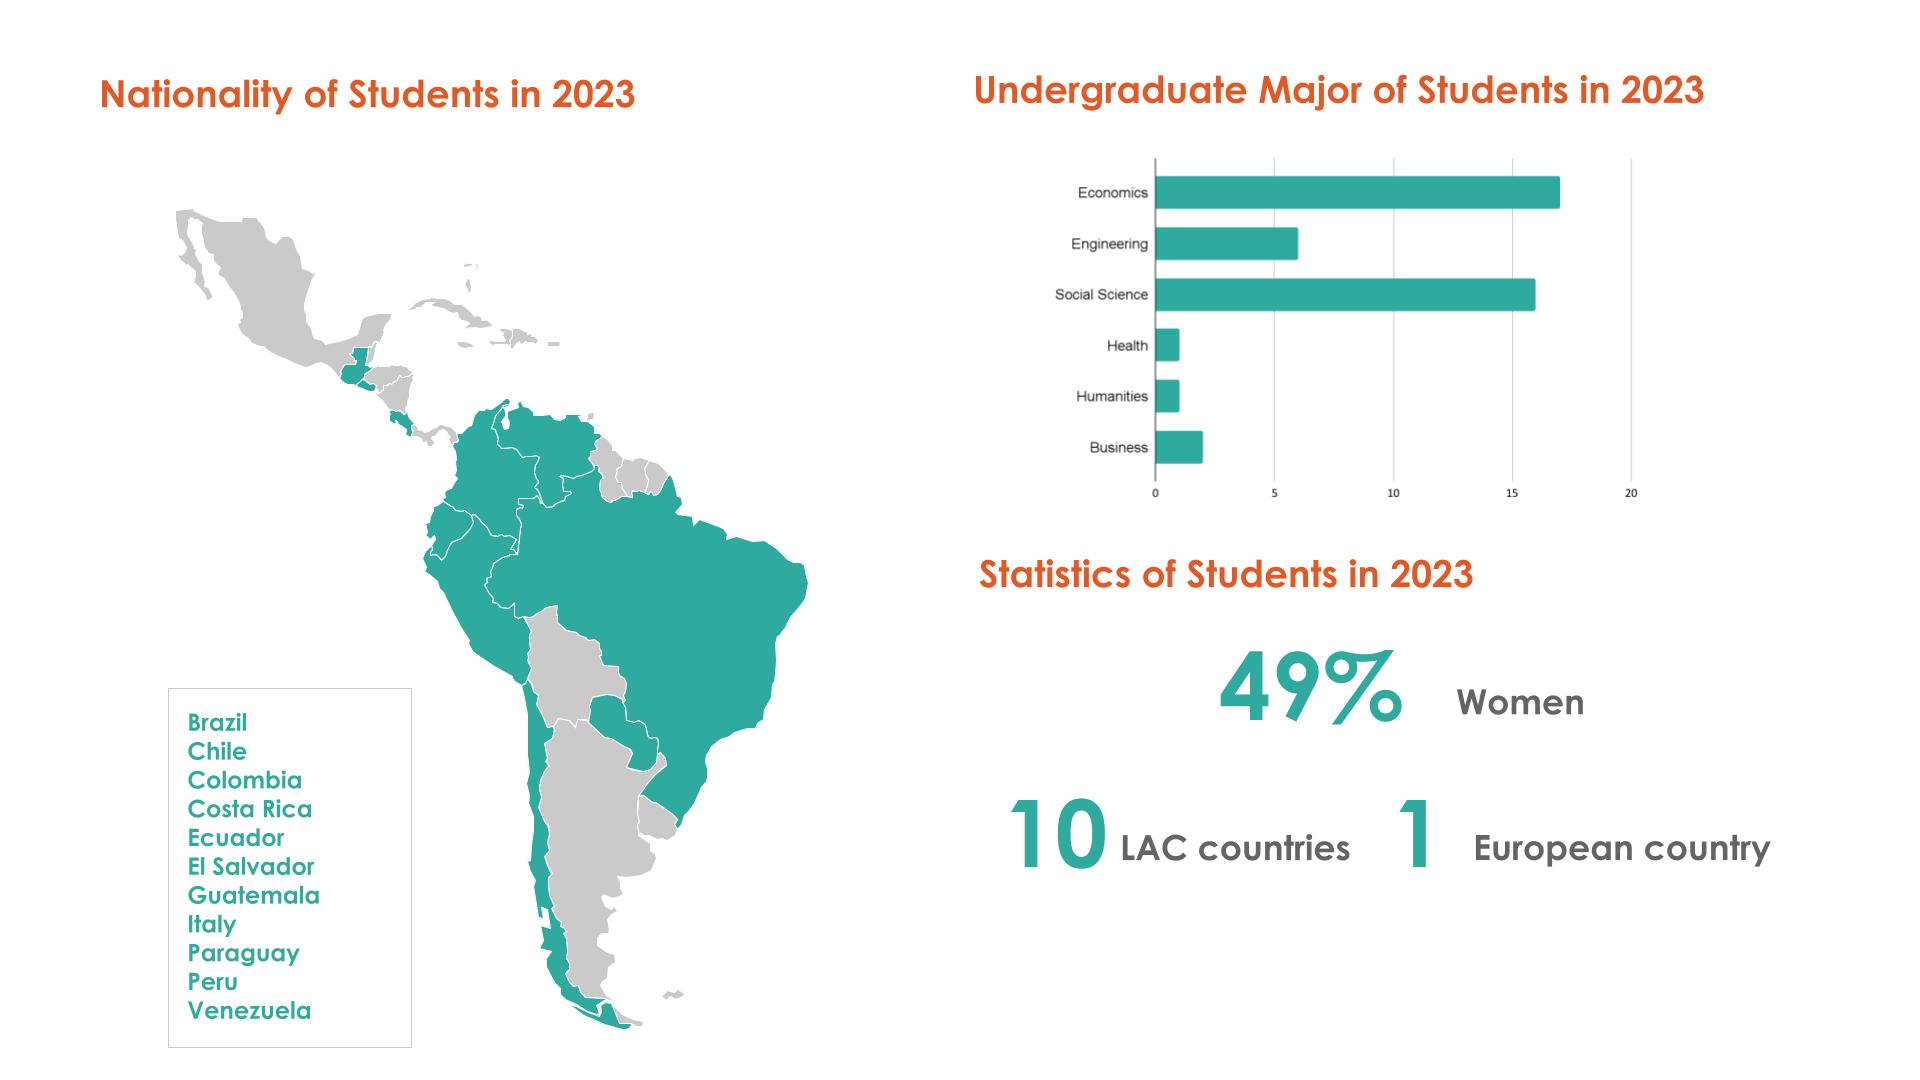 Statistics of Students in 2023